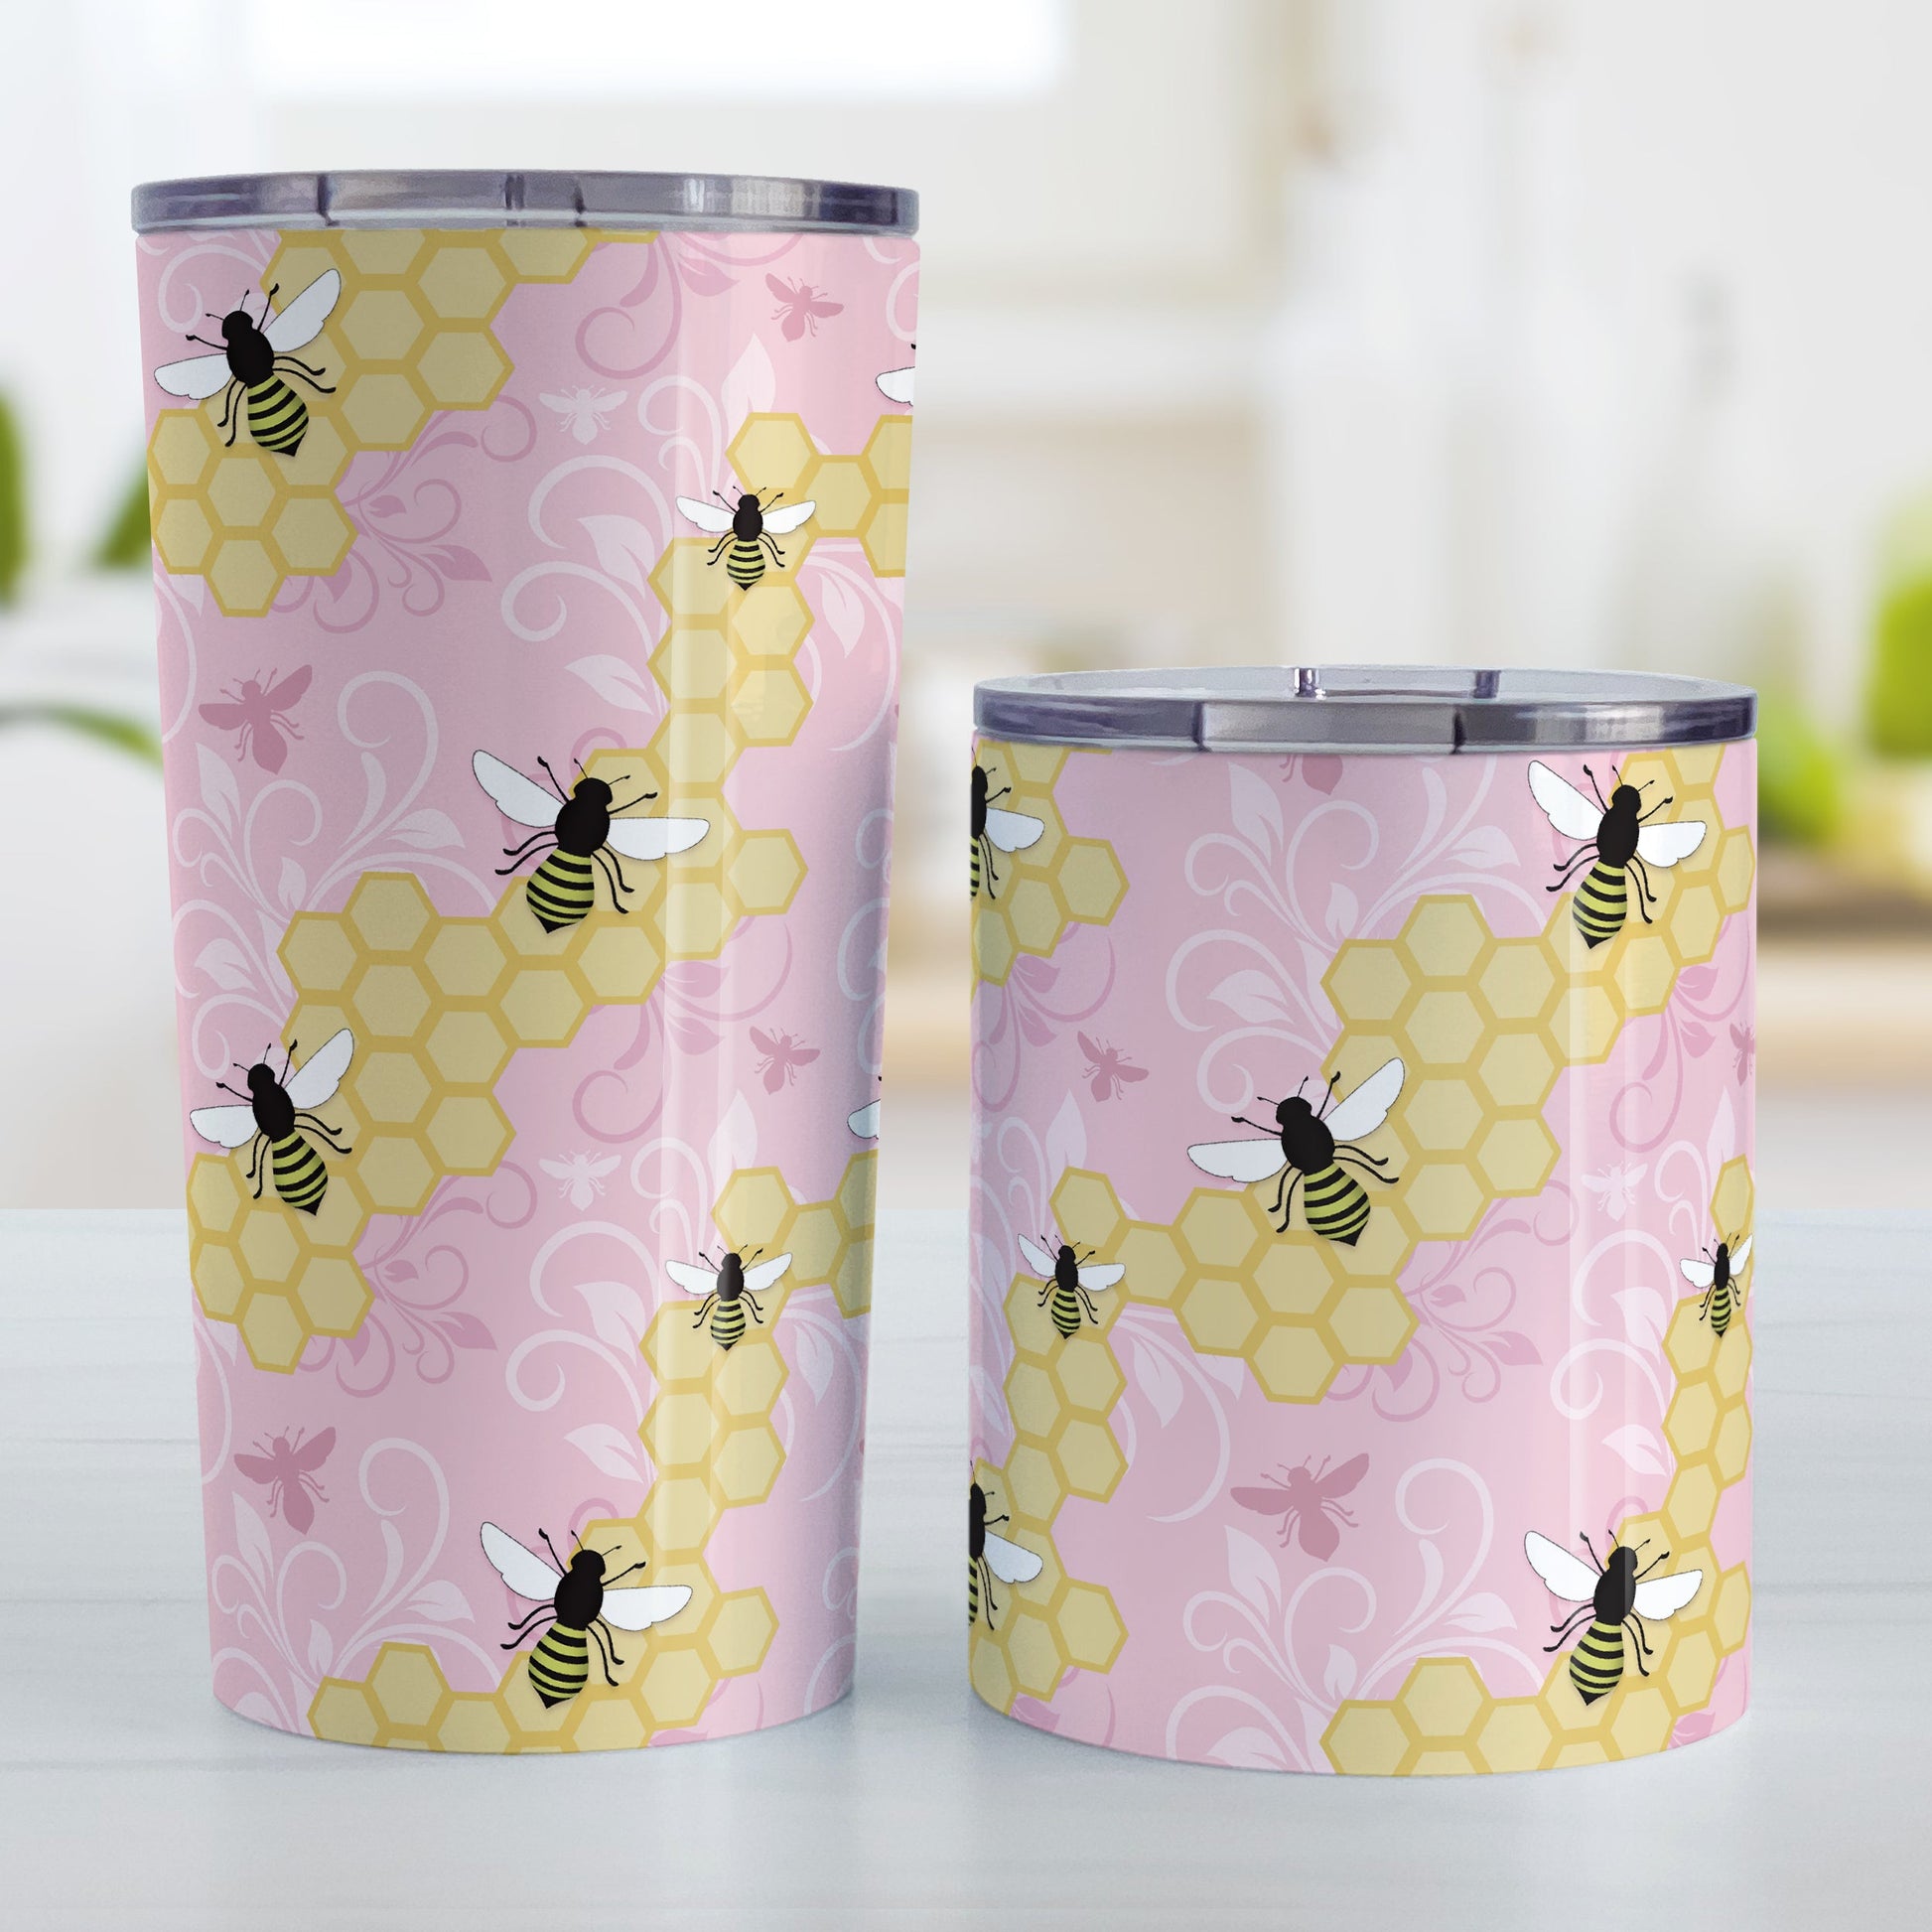 Pink Honeycomb Bee Tumbler Cup (20oz and 10oz, stainless steel insulated) at Amy's Coffee Mugs. Tumbler cups designed with a pattern of black and yellow bees on honeycomb lines over a pink flourish background that wraps around the cups. Photo shows both sized cups next to each other.